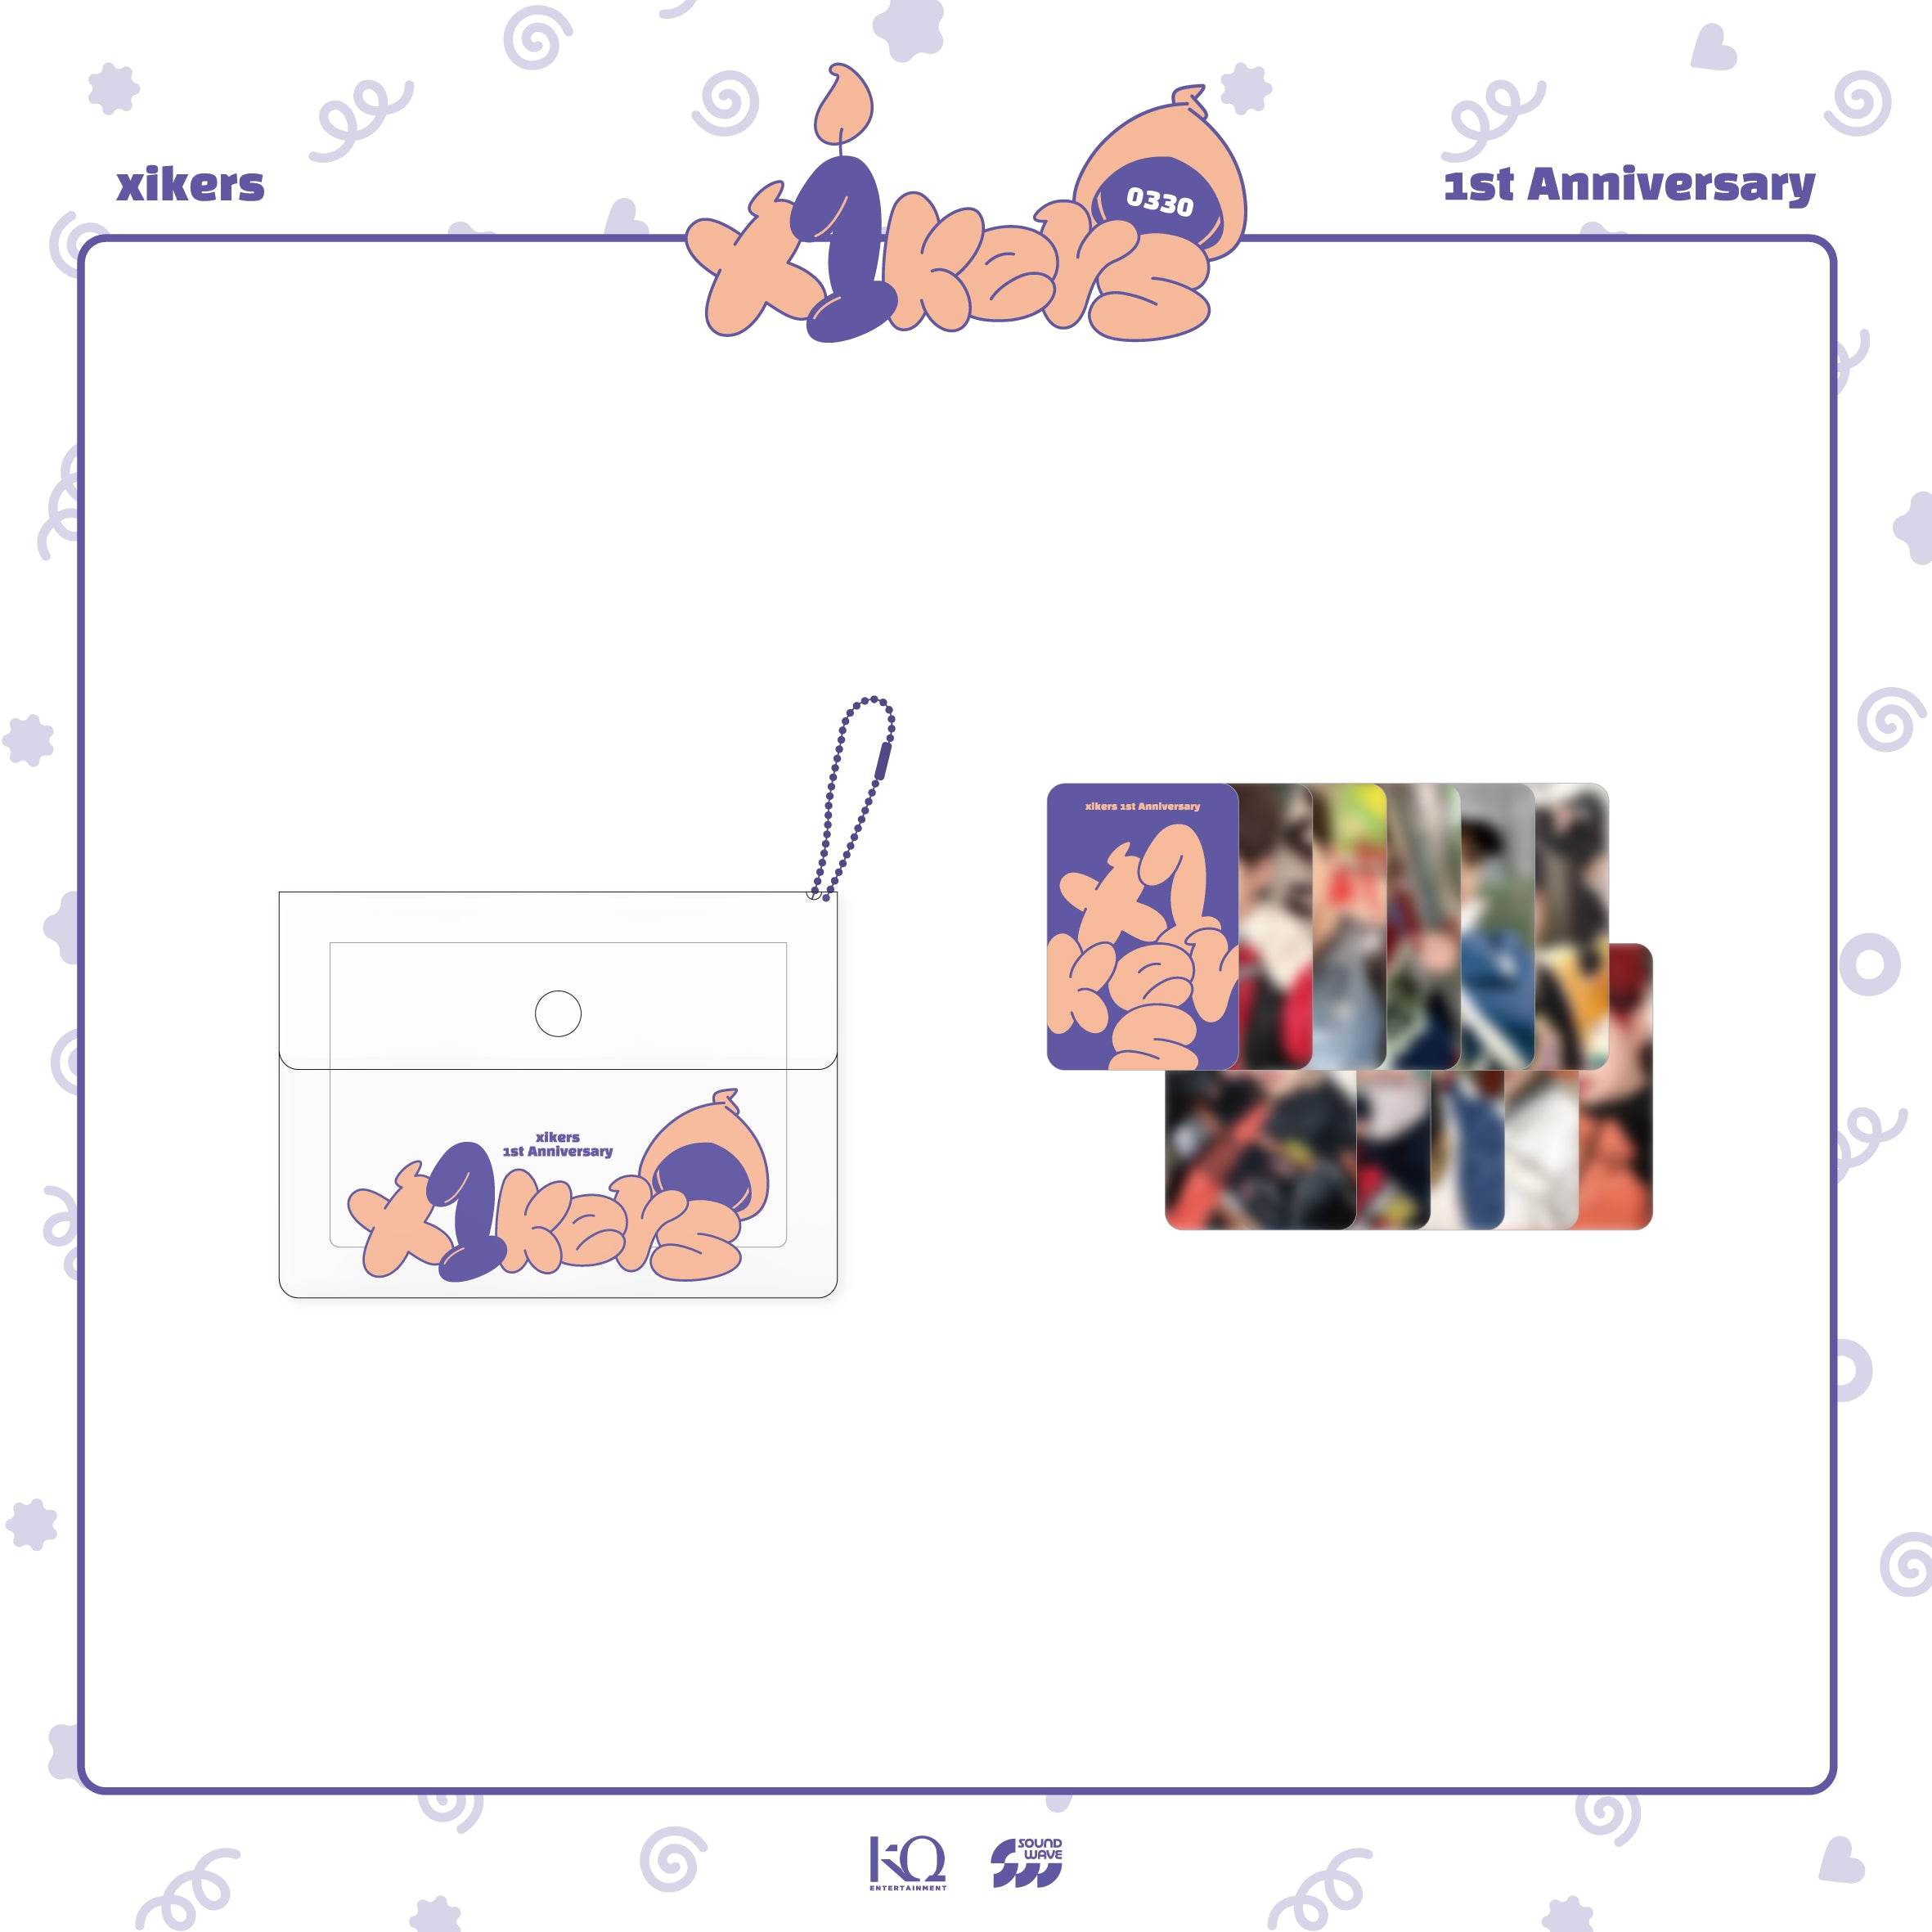 PRE-ORDER] xikers - 1st Anniversary OFFICIAL MERCH [x1kers] (PVC 